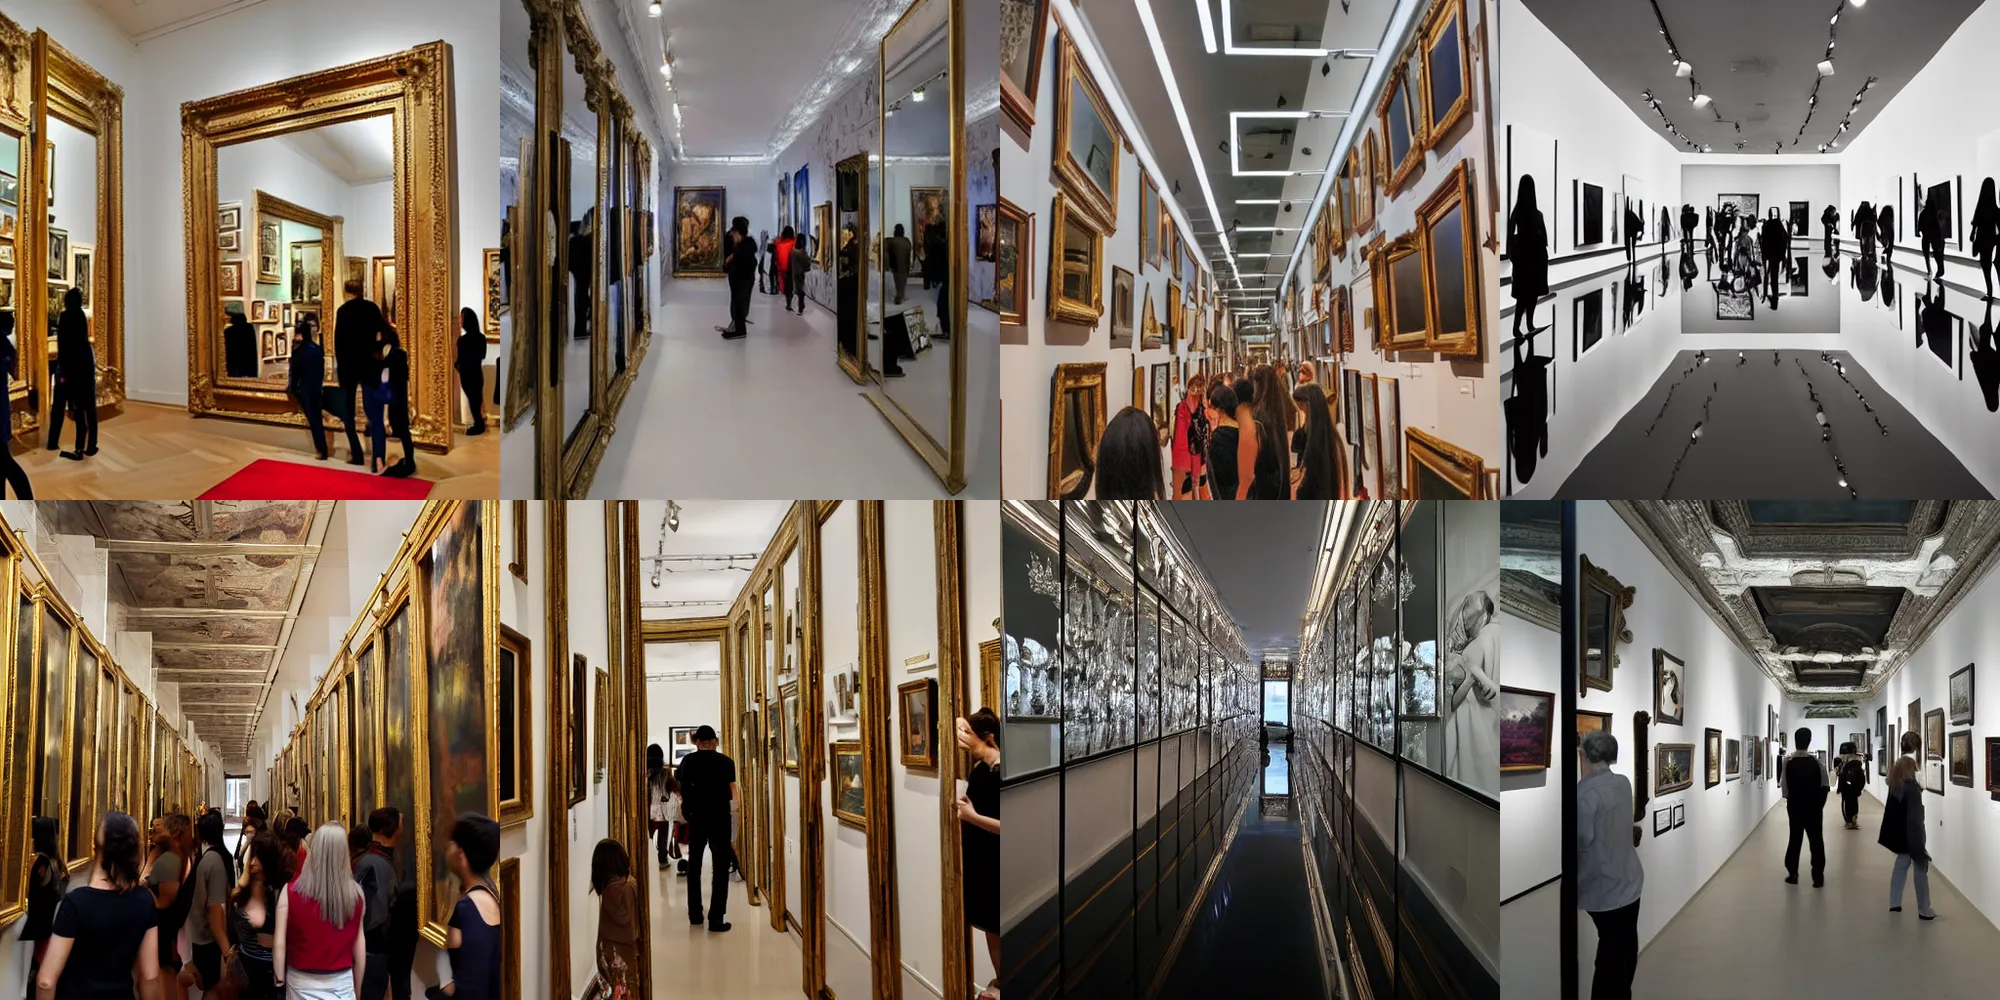 Prompt: an art gallery full of people, many tall mirrors reflecting the people in room